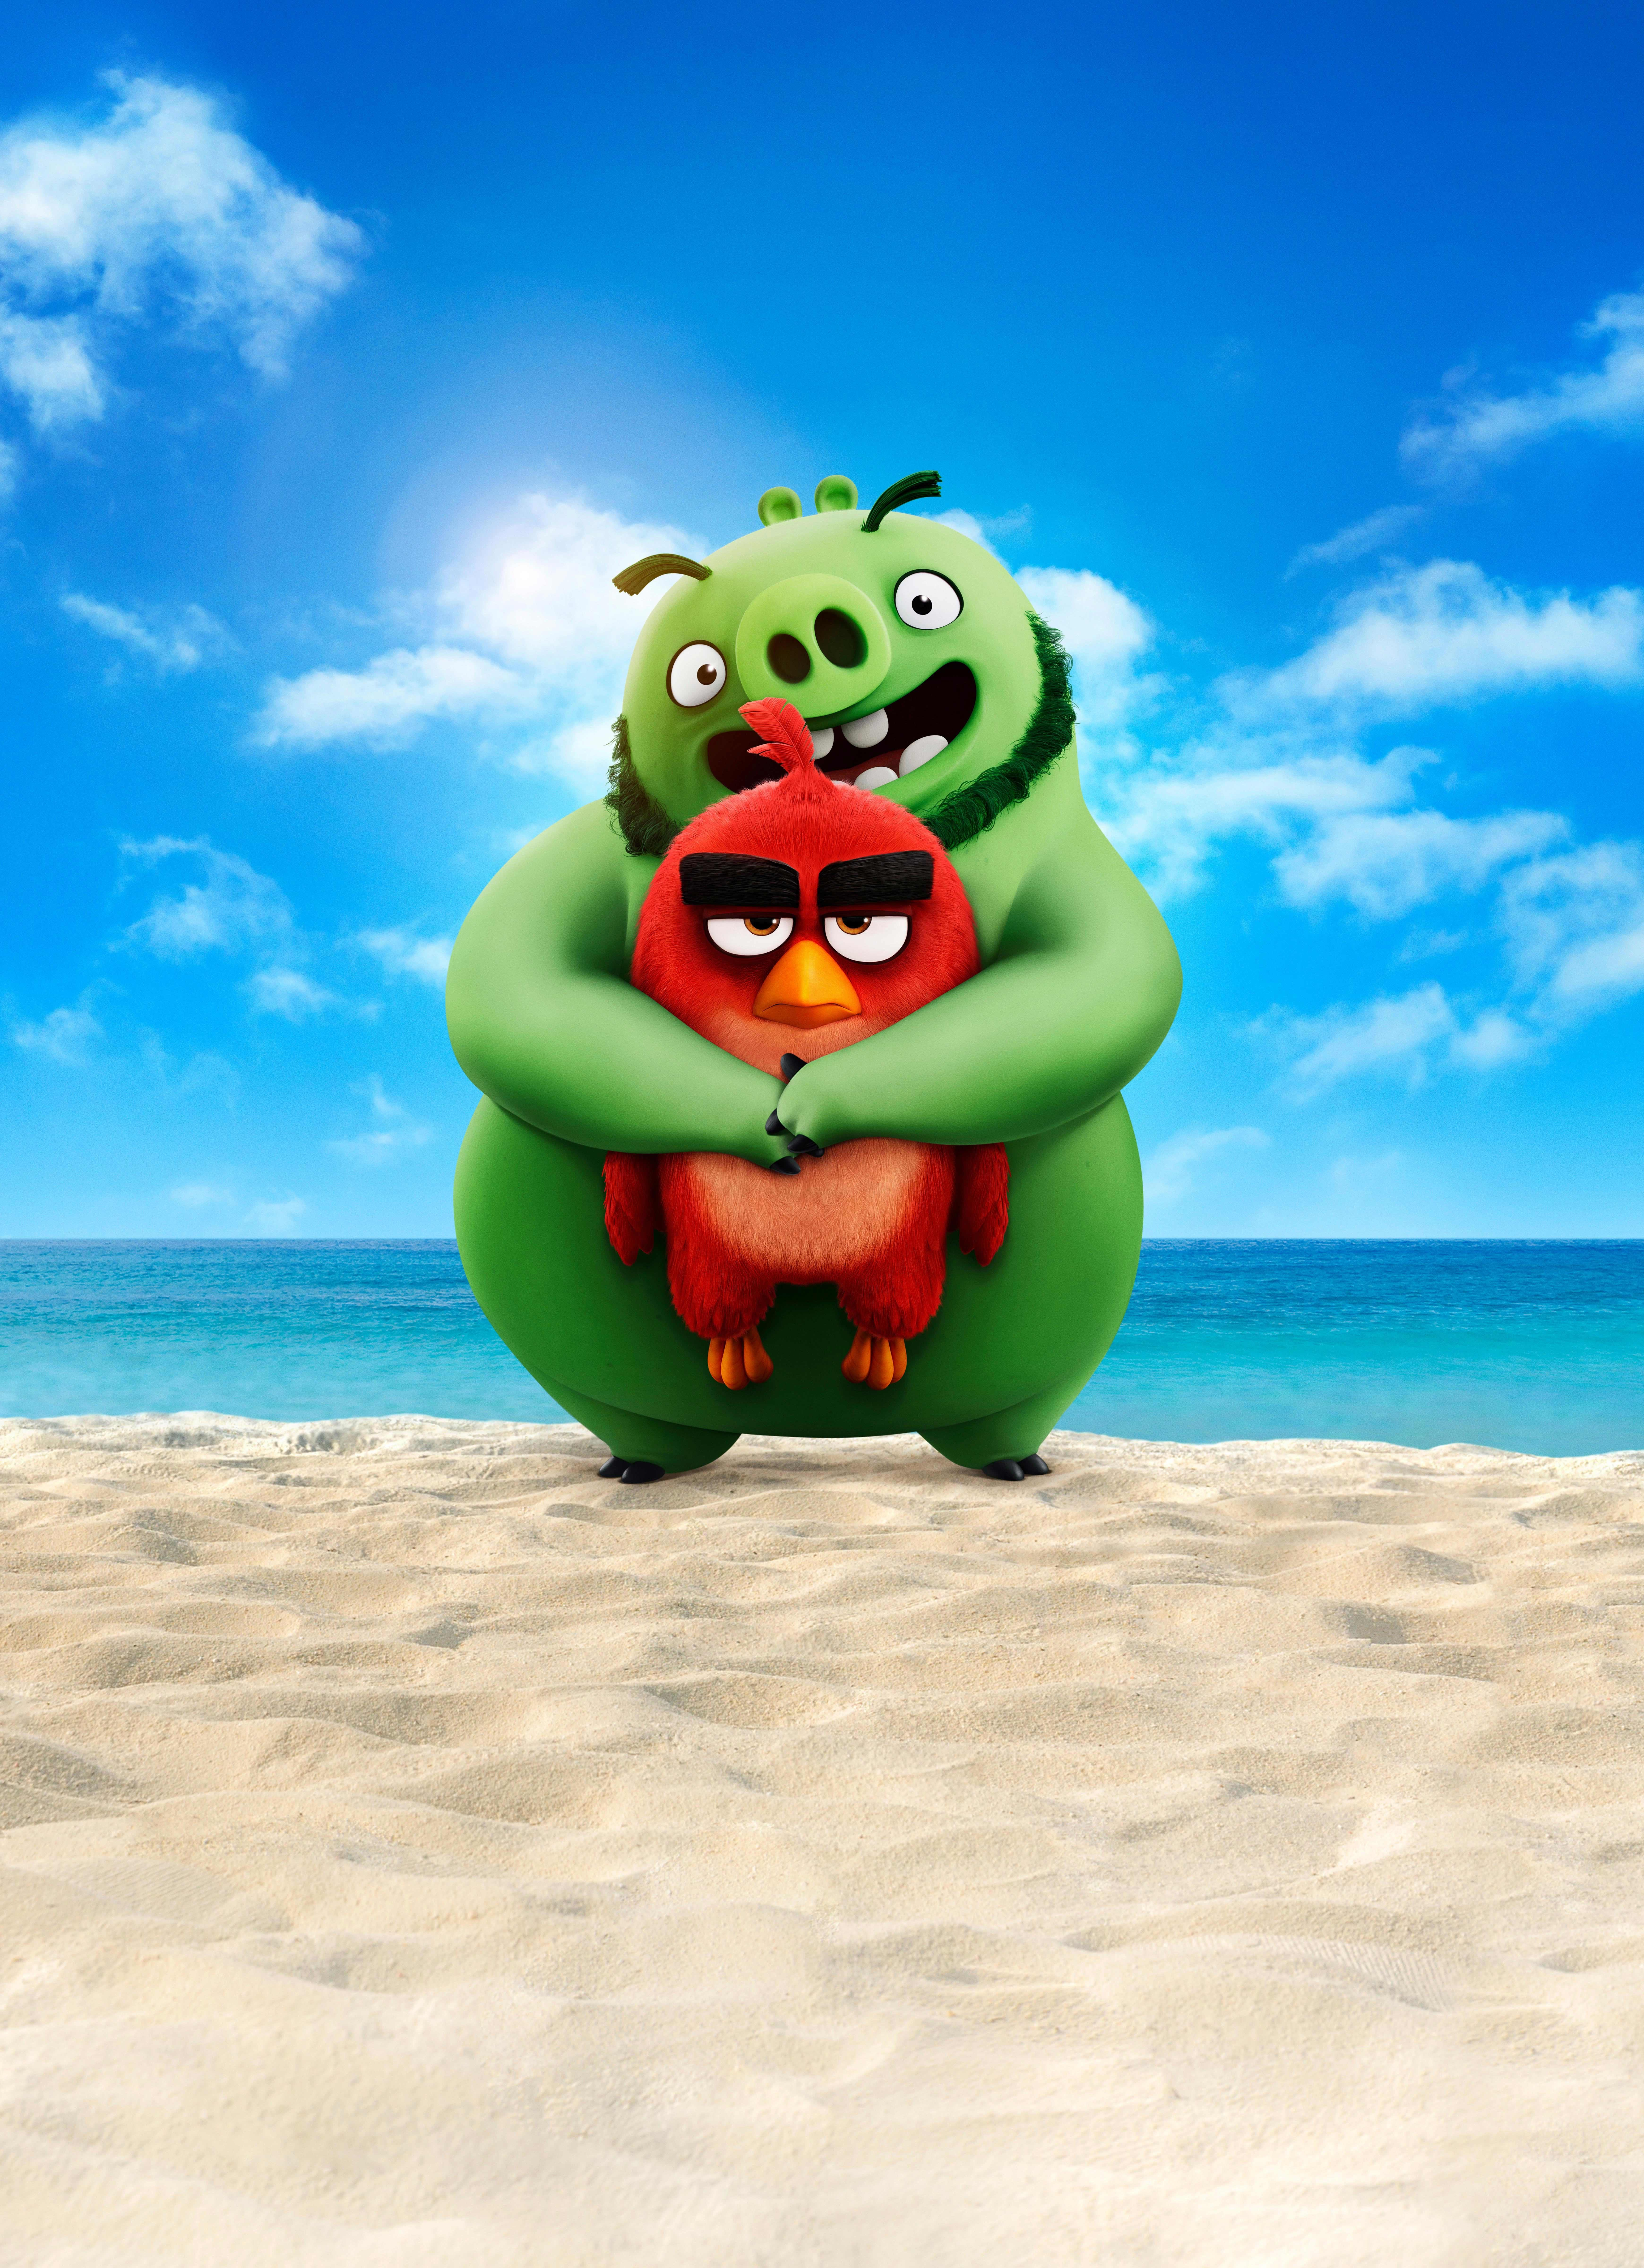 Angry Birds 2 iPhone XS MAX Wallpaper, HD Movies 4K